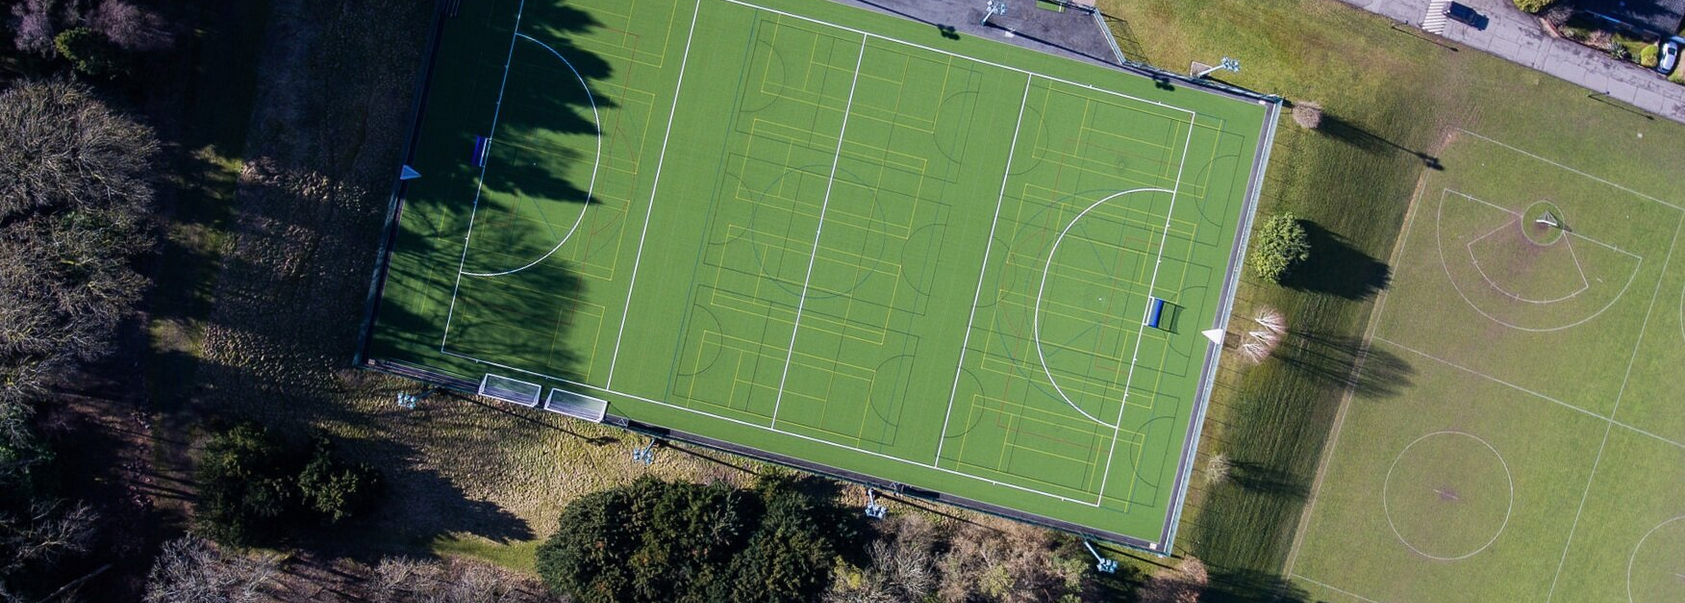 Synthetic Multi-Sports Surfacing